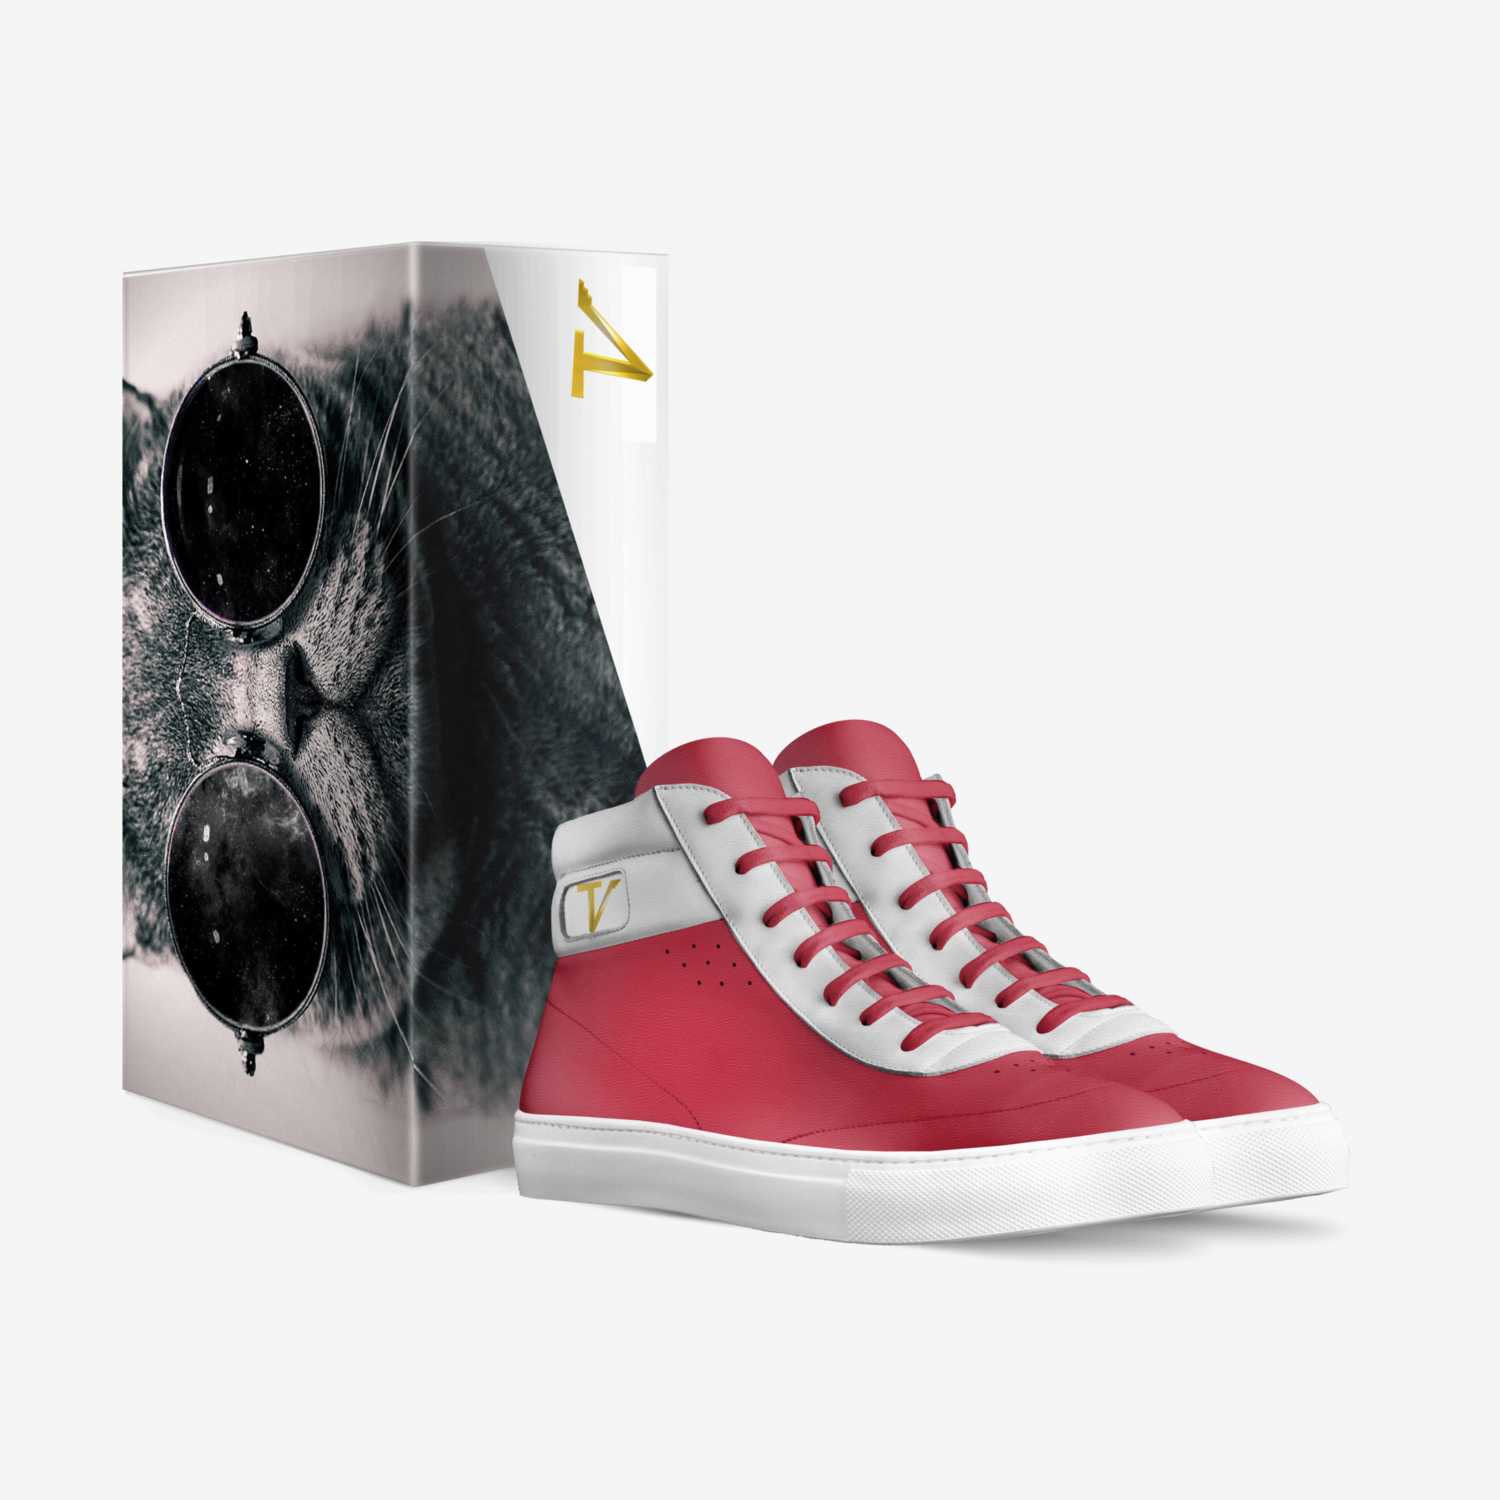 Criterion Red custom made in Italy shoes by Lamont Sanders | Box view